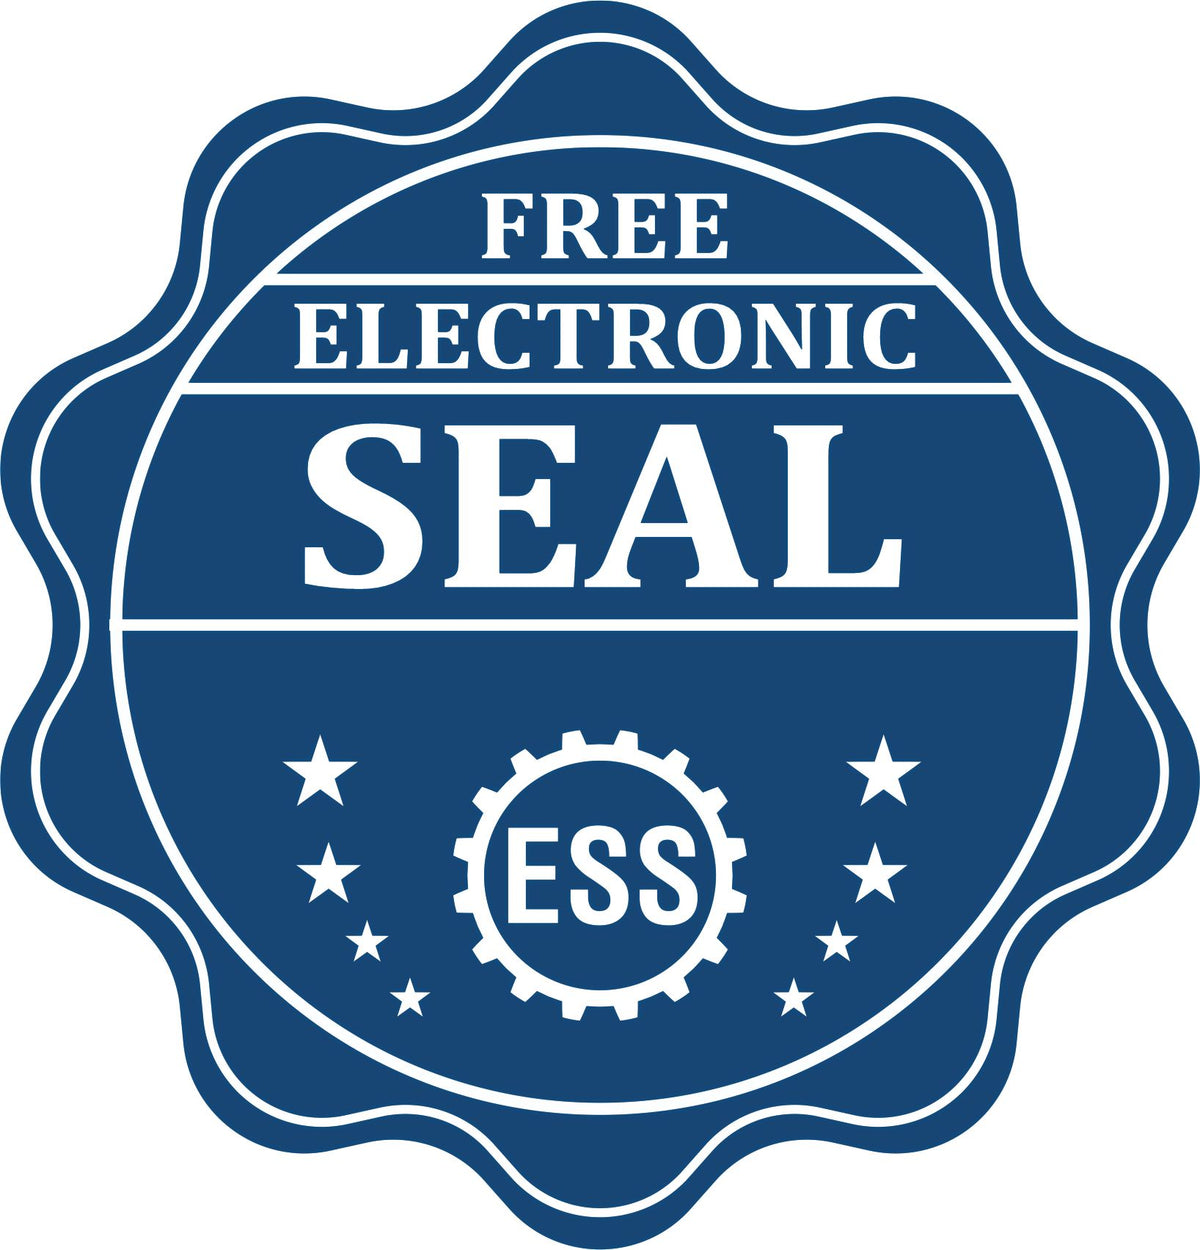 A badge showing a free electronic seal for the Hybrid Missouri Engineer Seal with stars and the ESS gear on the emblem.